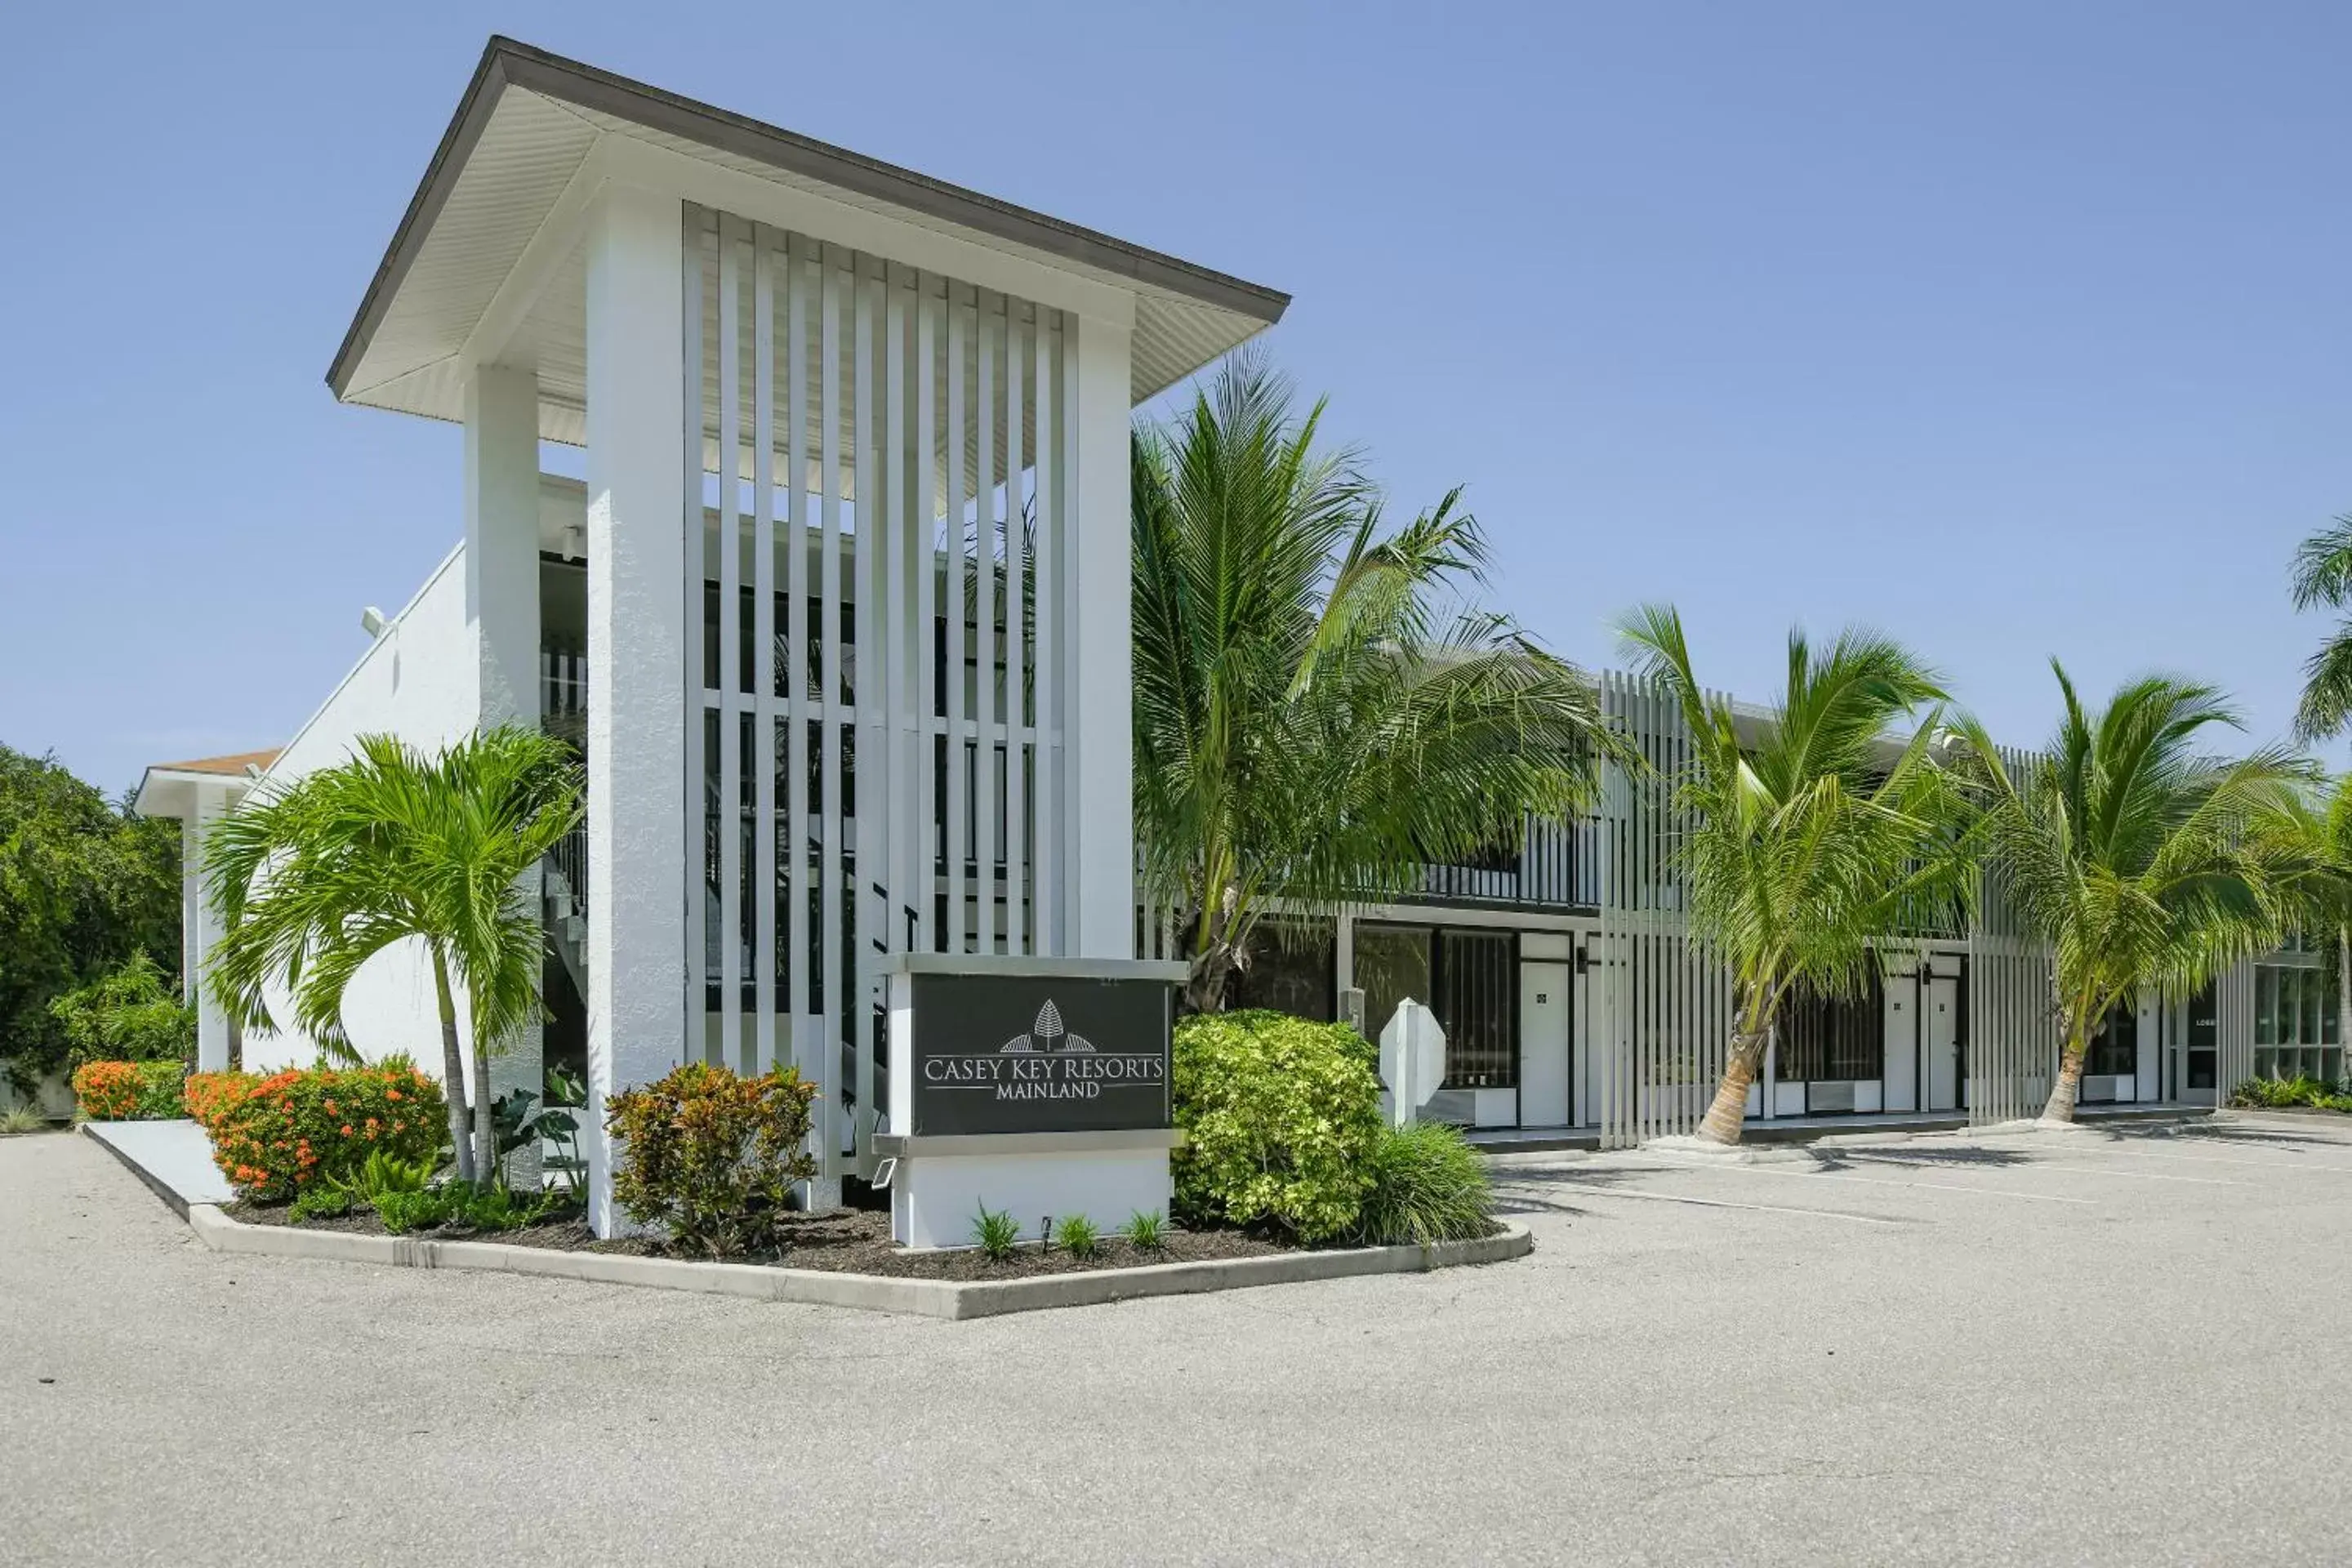 Property Building in Casey Key Resorts - Mainland